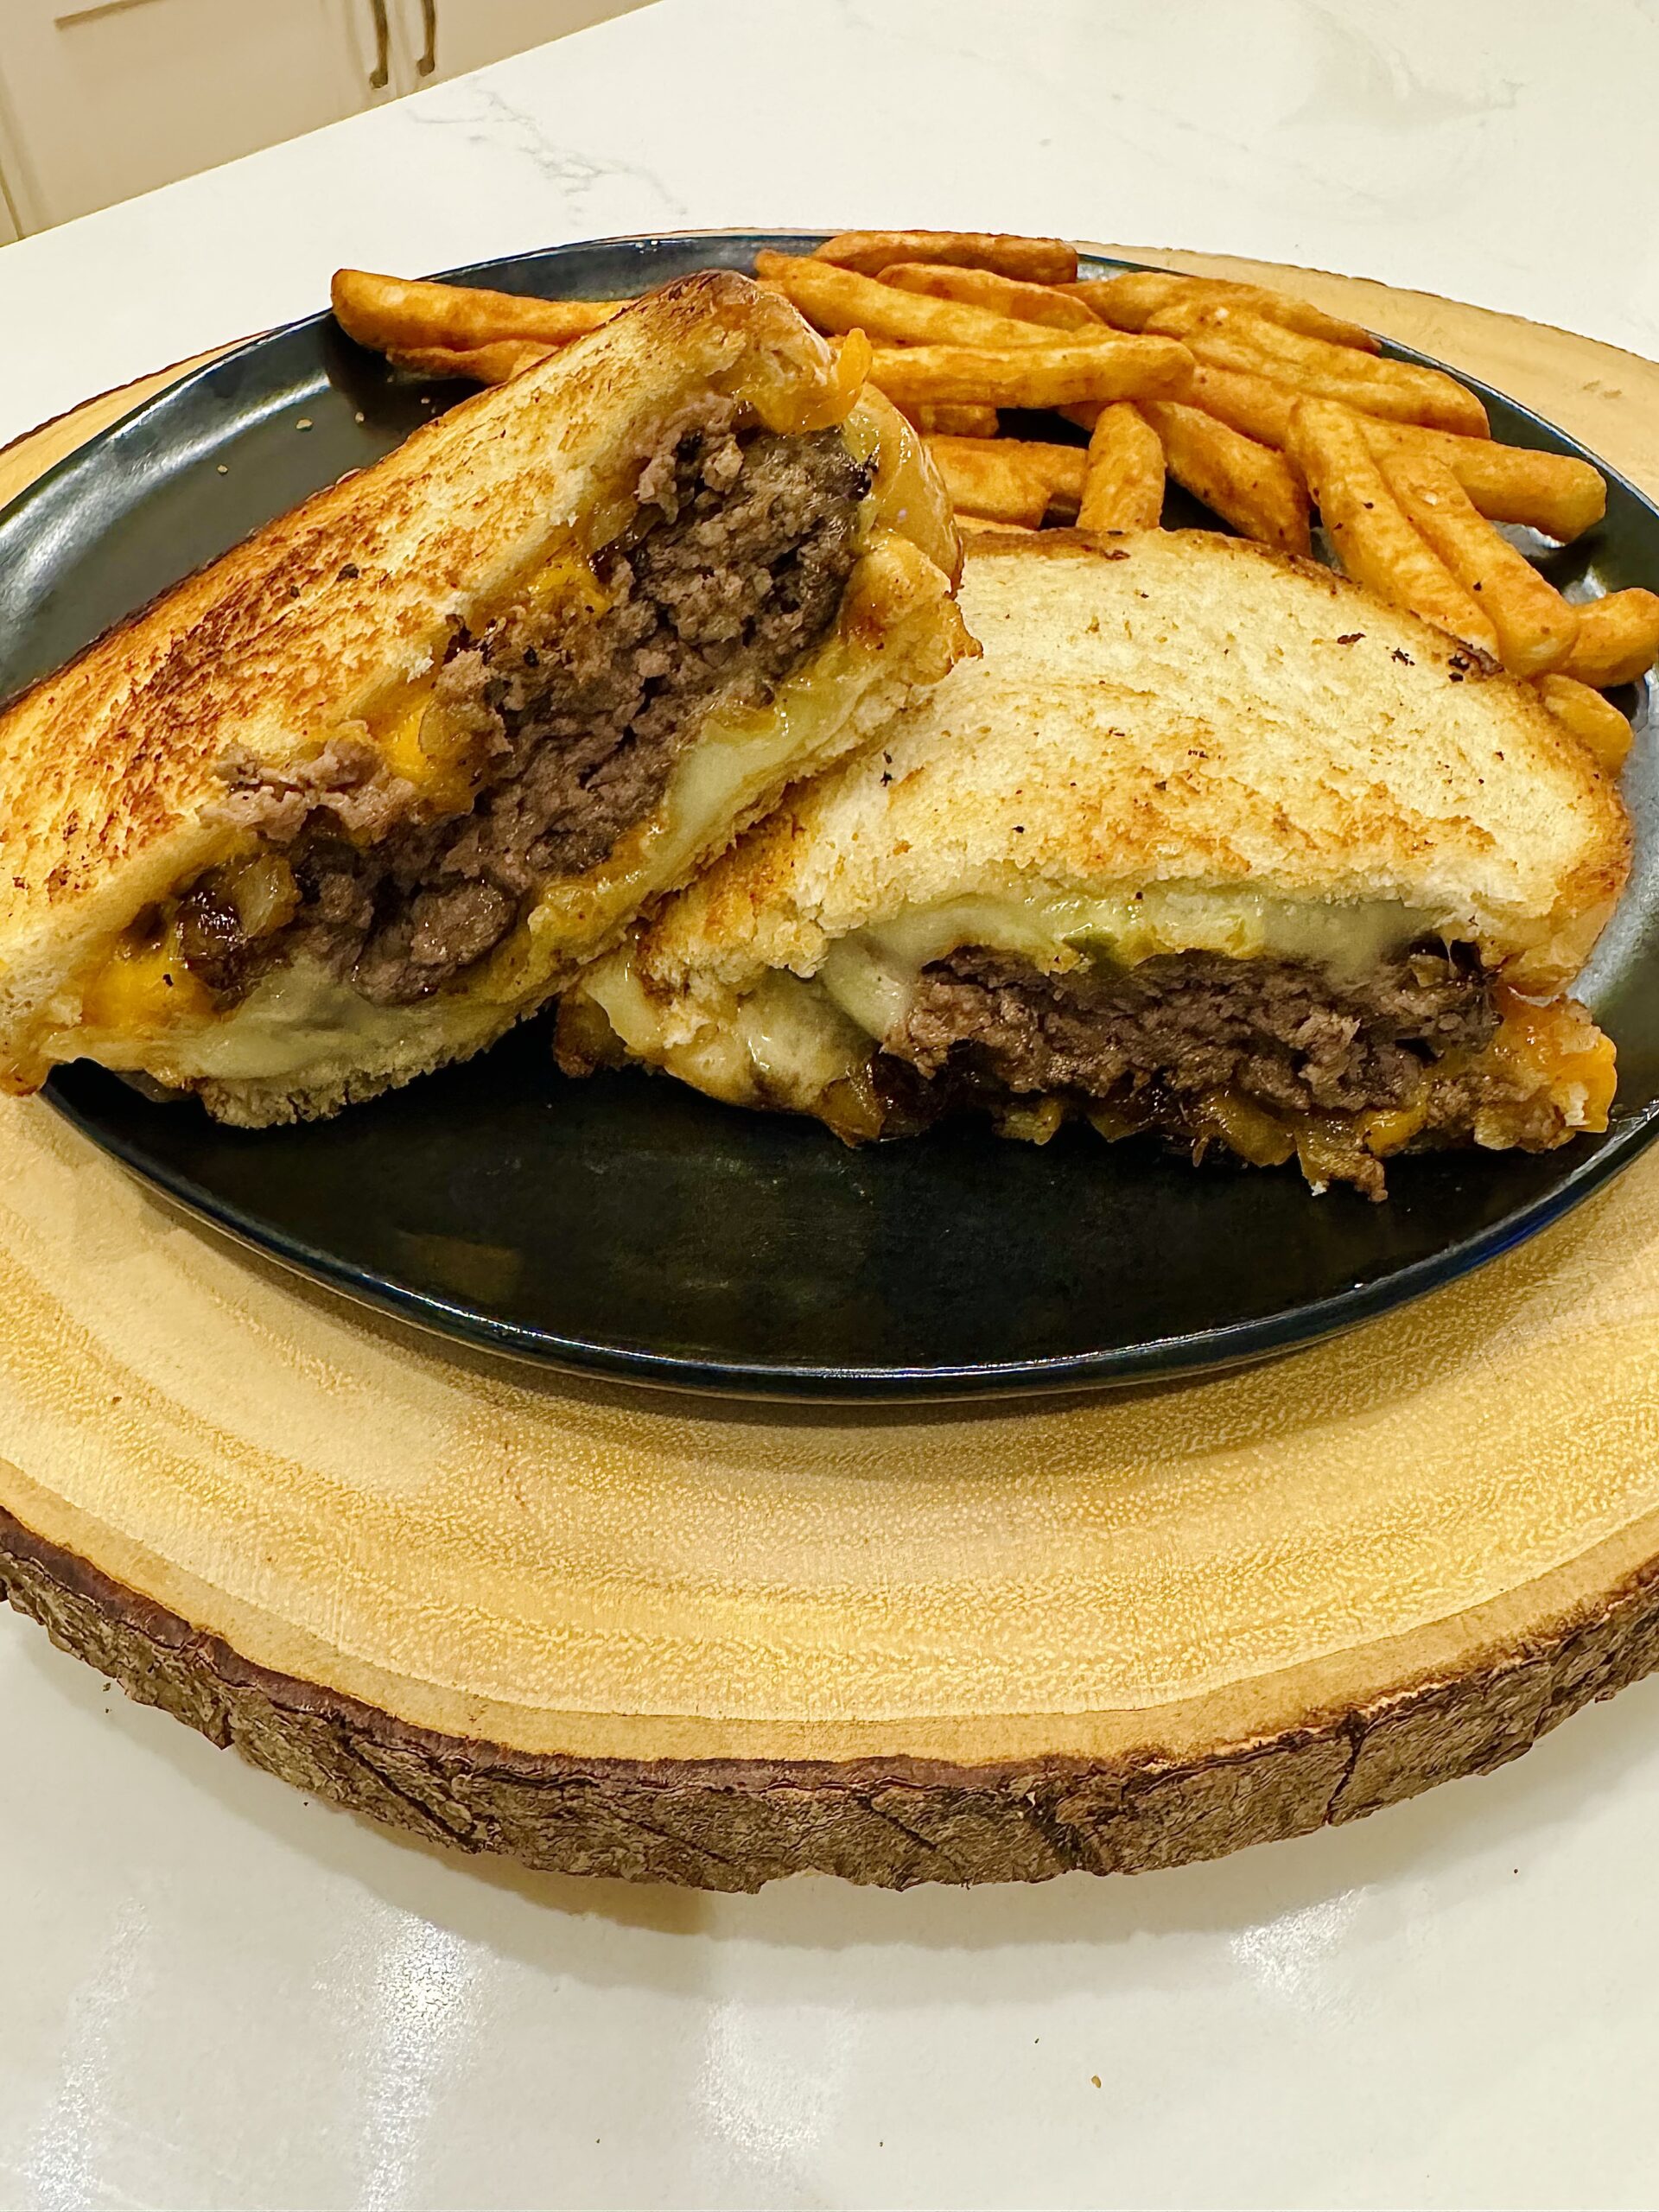 Patty melts and special sauce